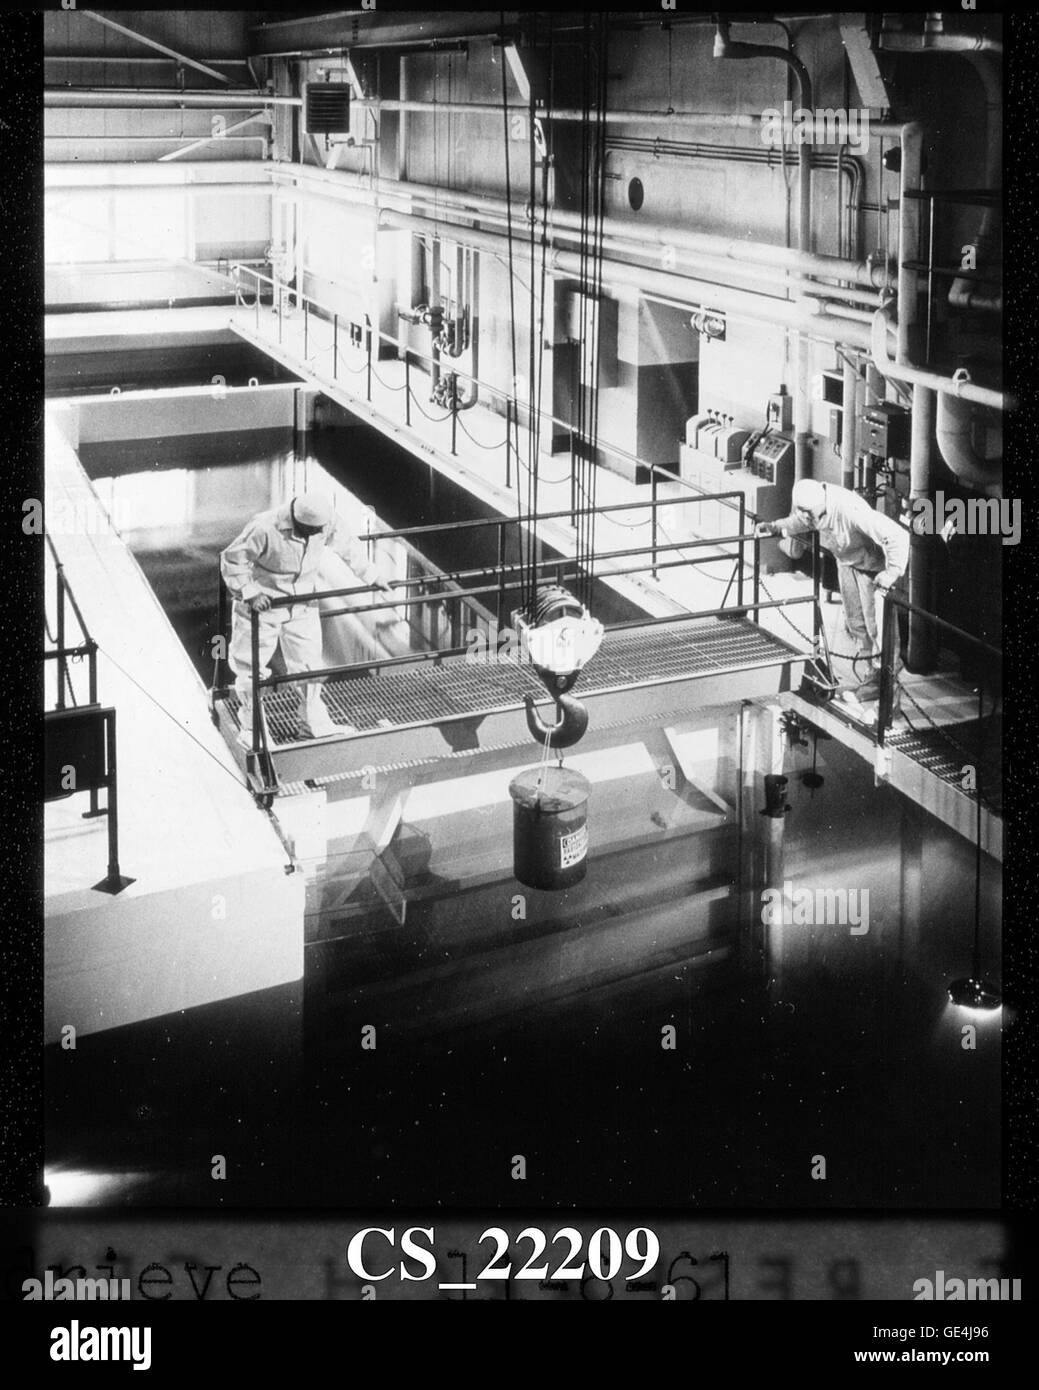 Two Plum Brook employees use an overhead crane to lift a lead cask of low- level radioactive waste from Canal F. This was the first canal outside of the containment vessel. Canals G and H are visible behind the man standing on the bridge. The bridge was movable so technicians could continually work above the objects as the moved through the canal system. The canal connected to the hot laboratory, which was adjacent to the south side of the reactor building. Radioactive materials were moved under water with vehicles, or remotely controlled cranes, between heavily shielded walls in the hot handl Stock Photo